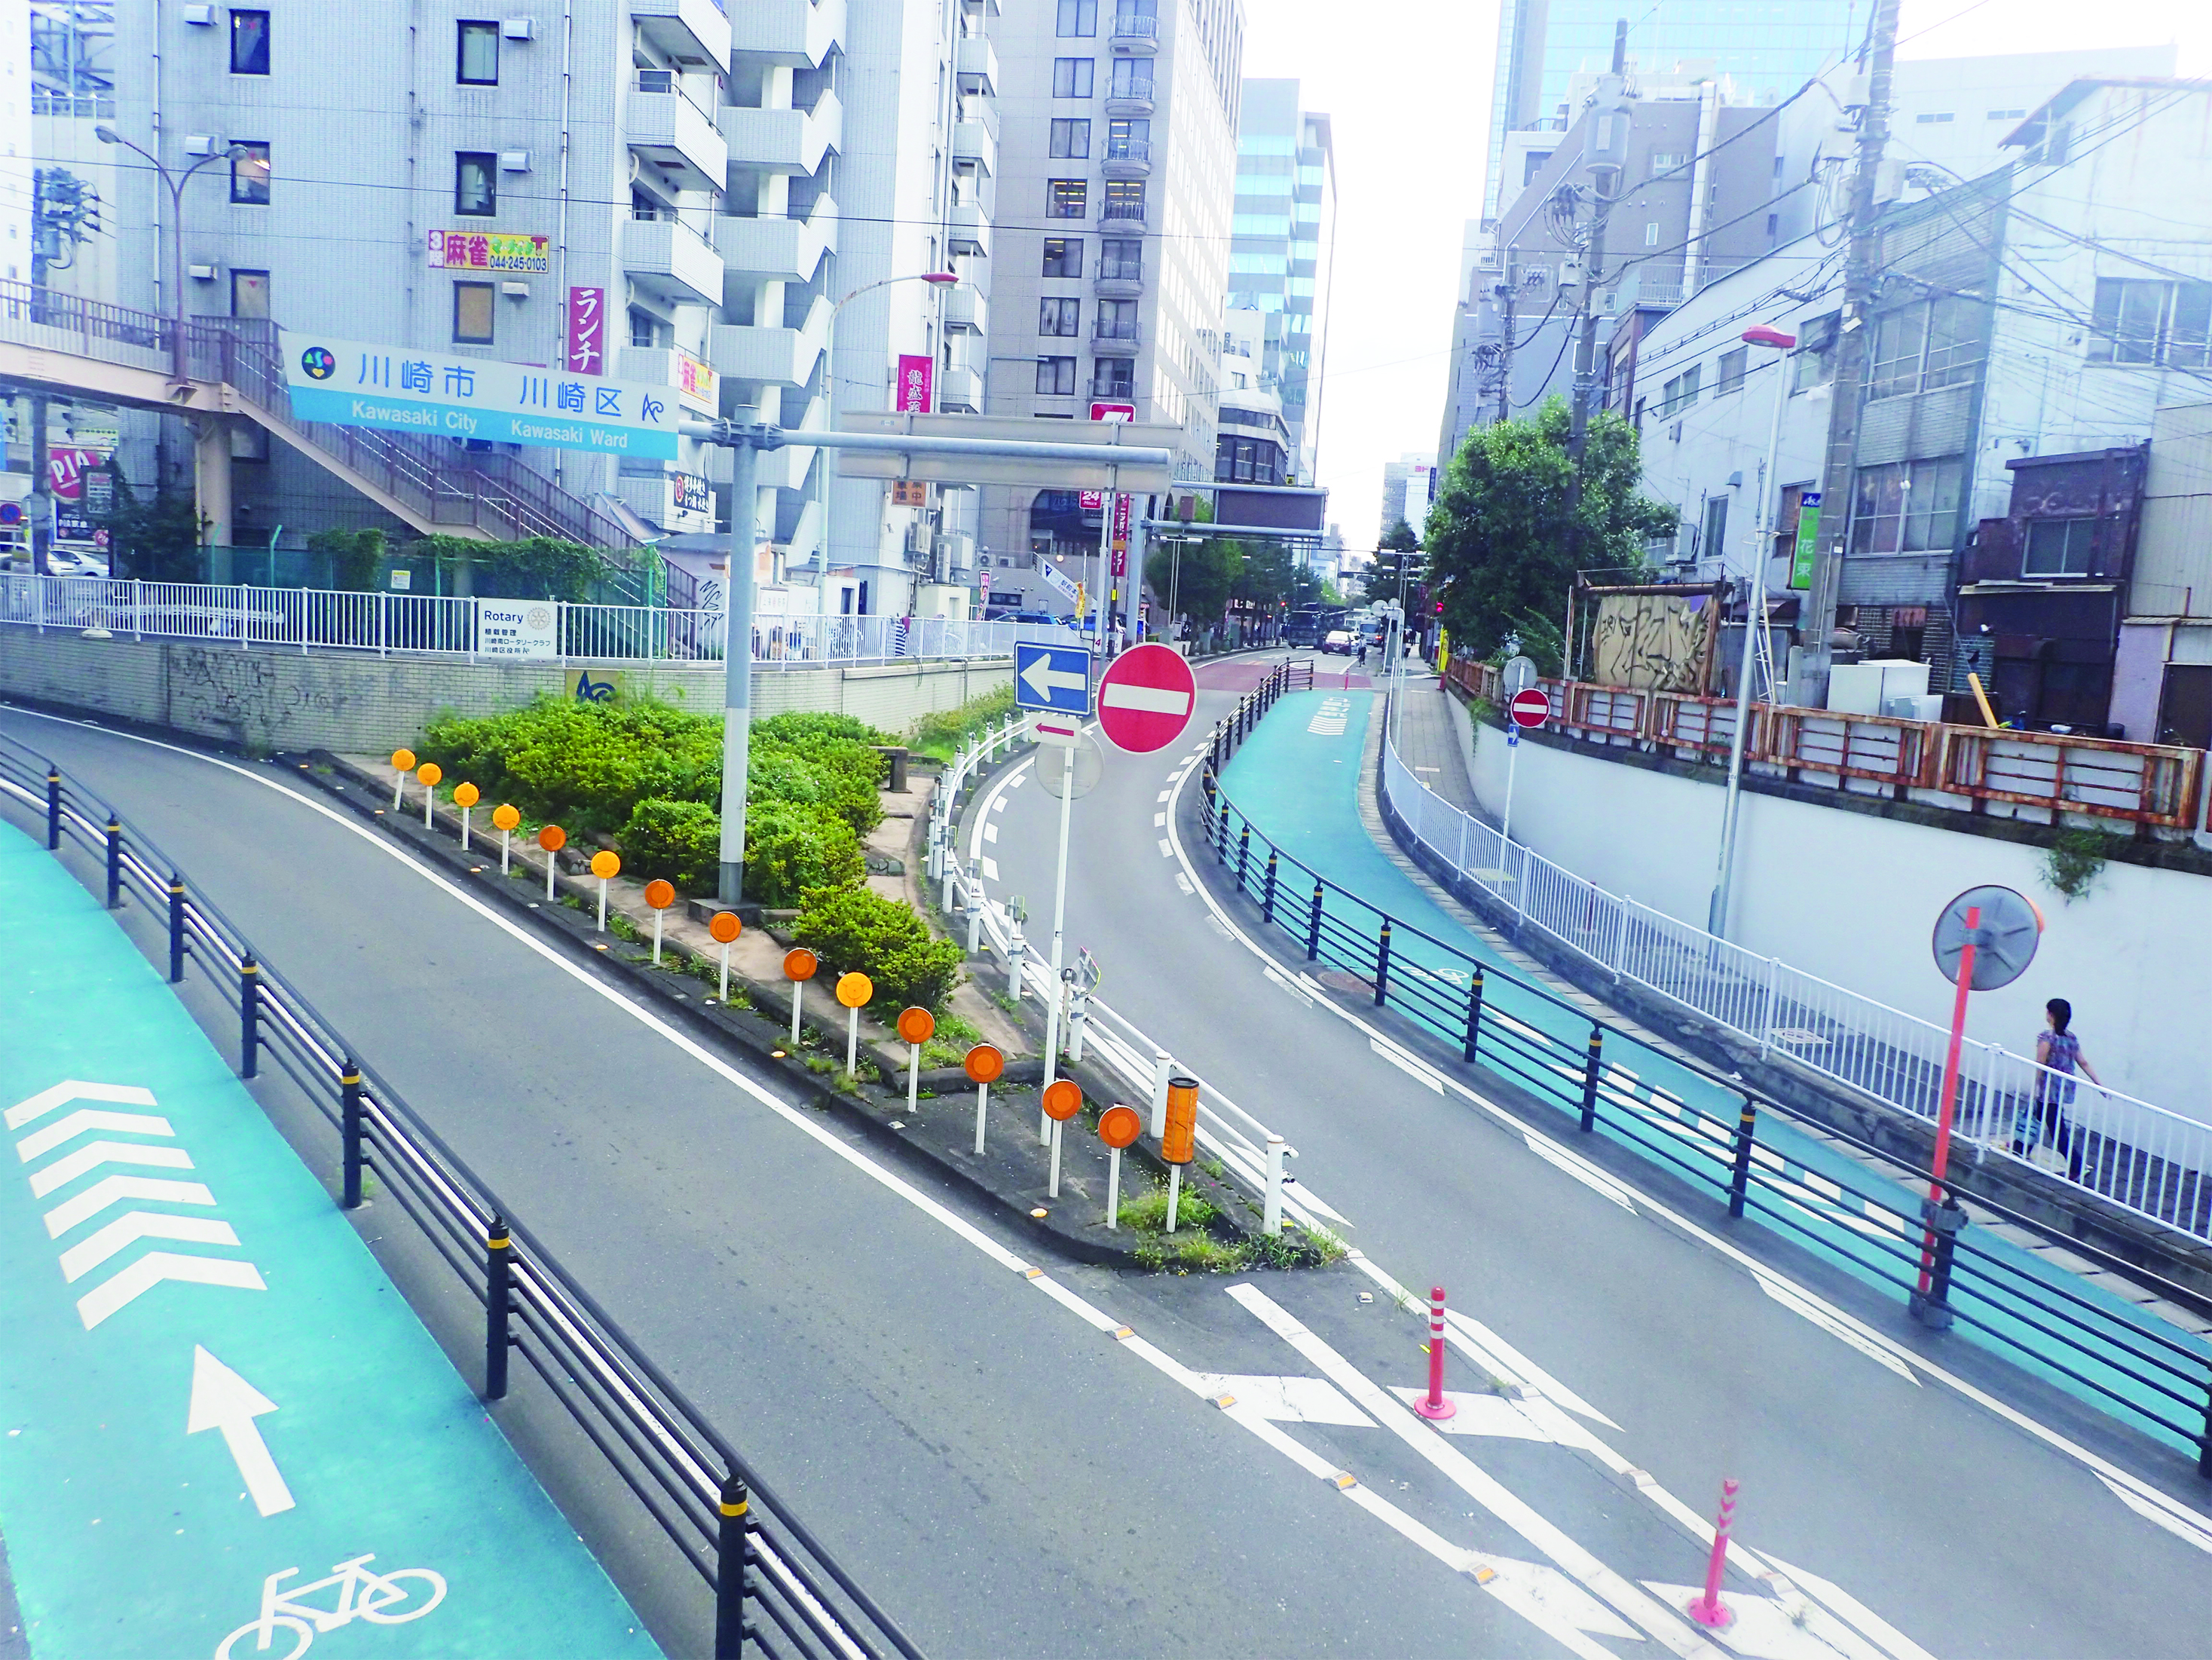 Installation of bicycle lanes in front of stations